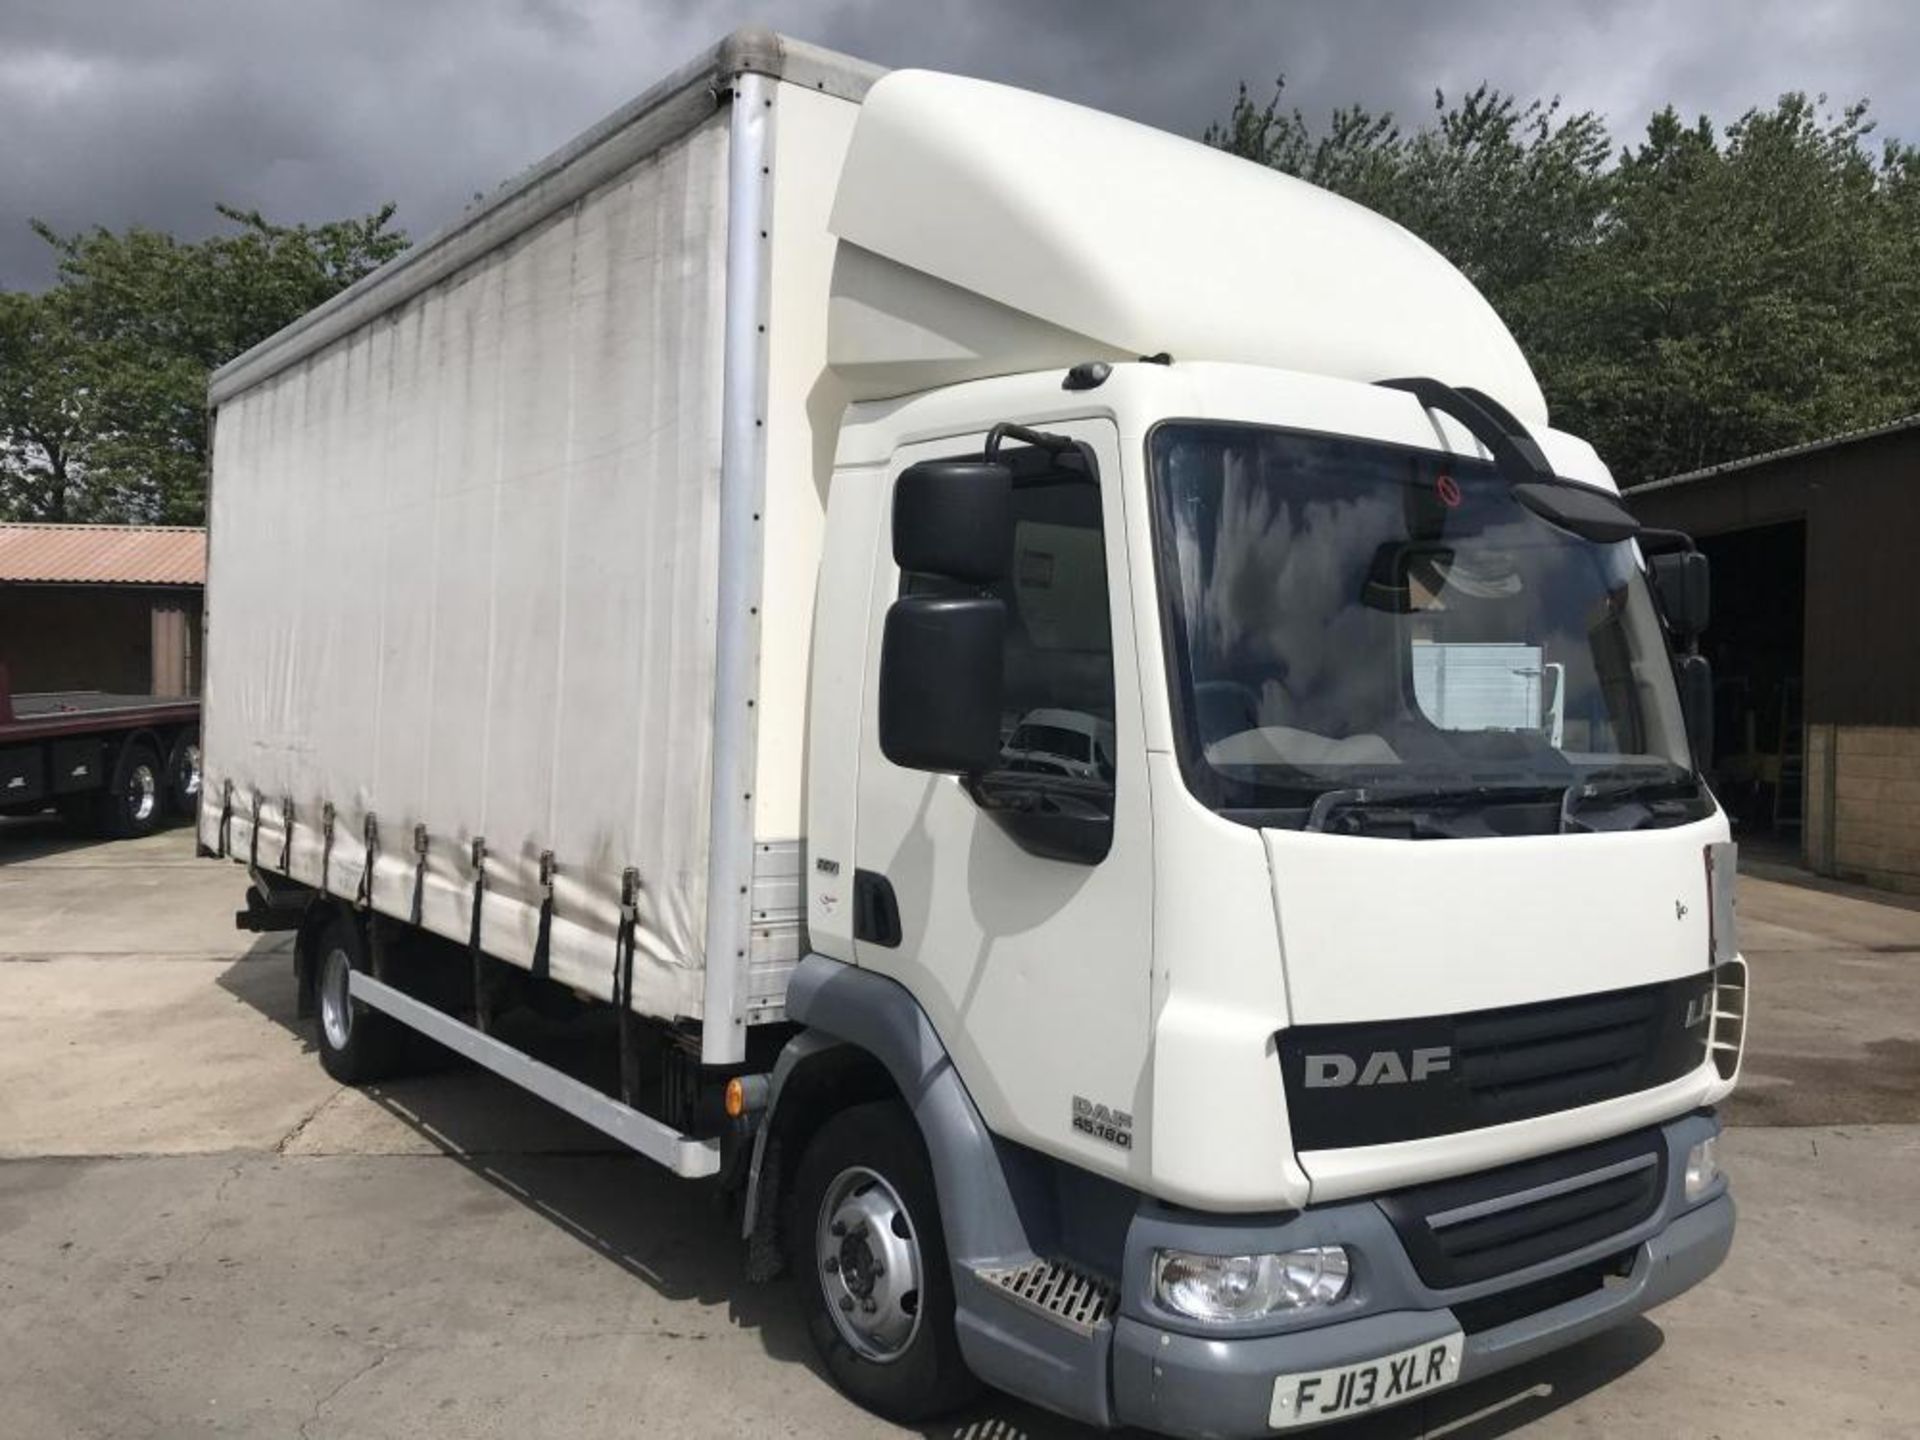 2013/13 REG DAF TRUCKS LF FA 45.160 FB WHITE CURTAIN SIDED LORRY, SHOWING 0 FORMER KEEPERS *PLUS VAT